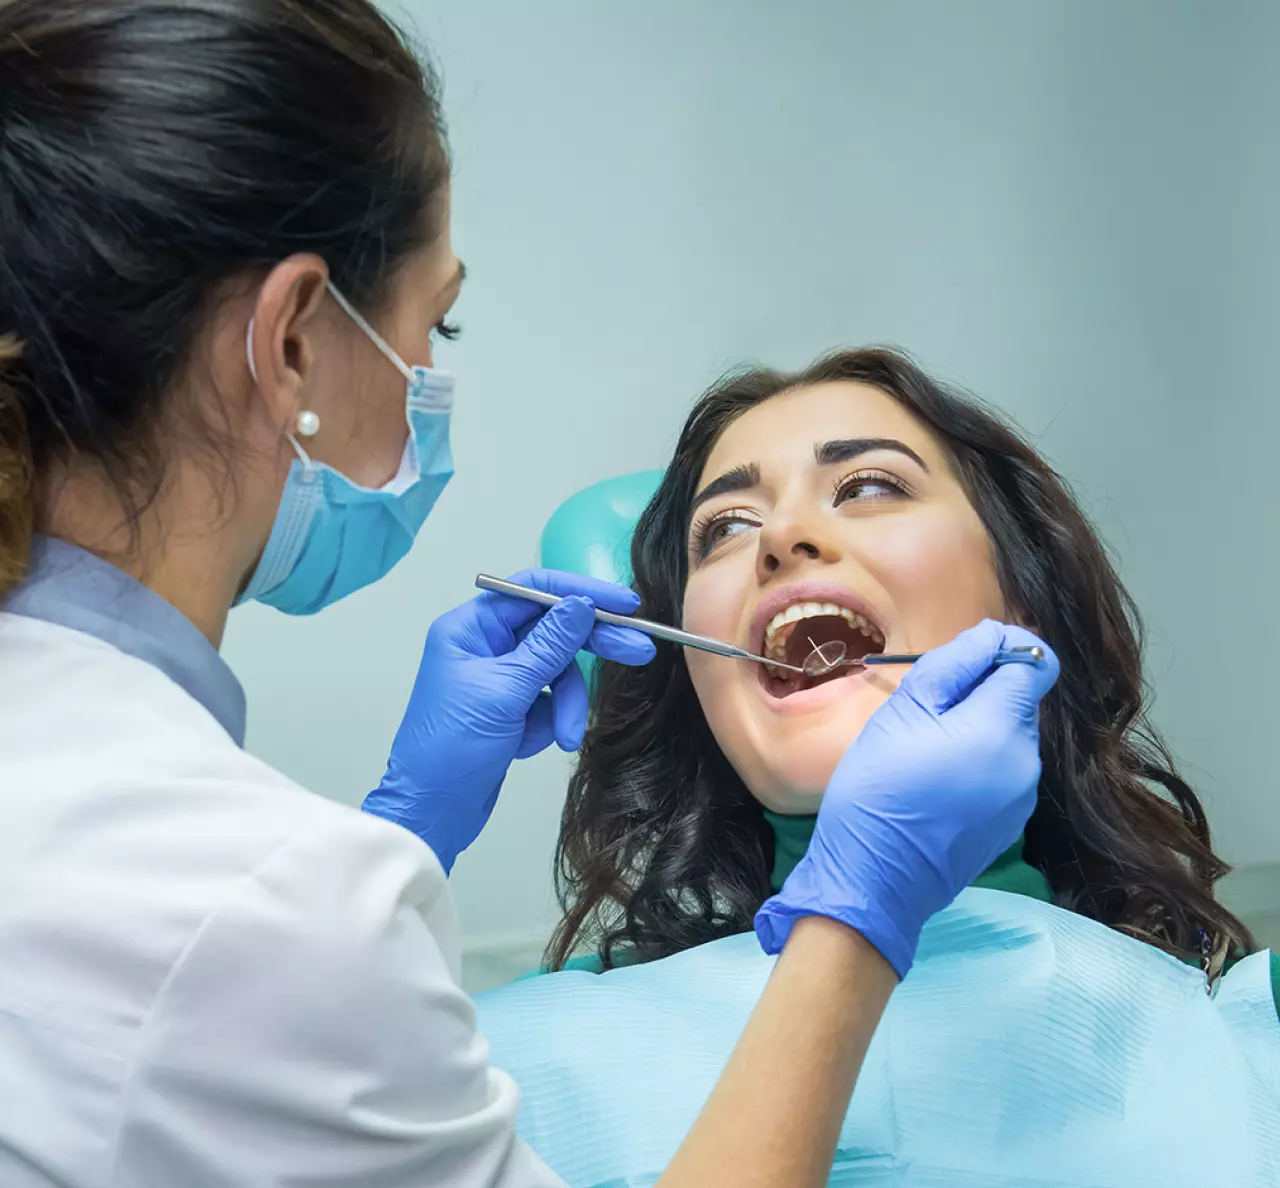 Exceptional Dental Services Practice in Lisle, IL. 